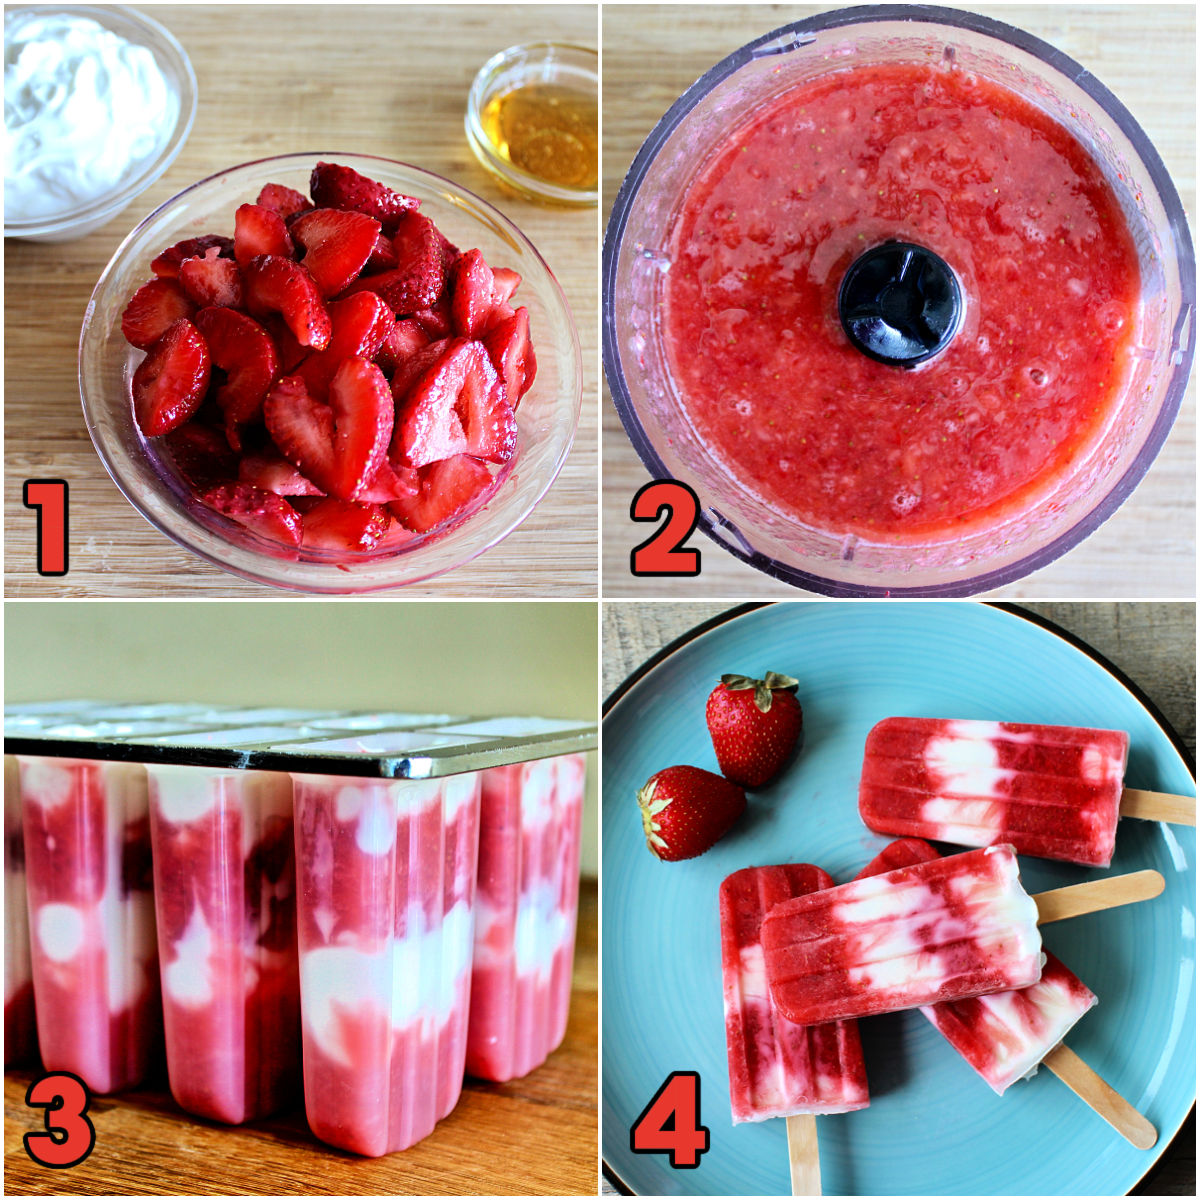 Collage of steps 1-4 for how to make Strawberry Greek yogurt popsicles.